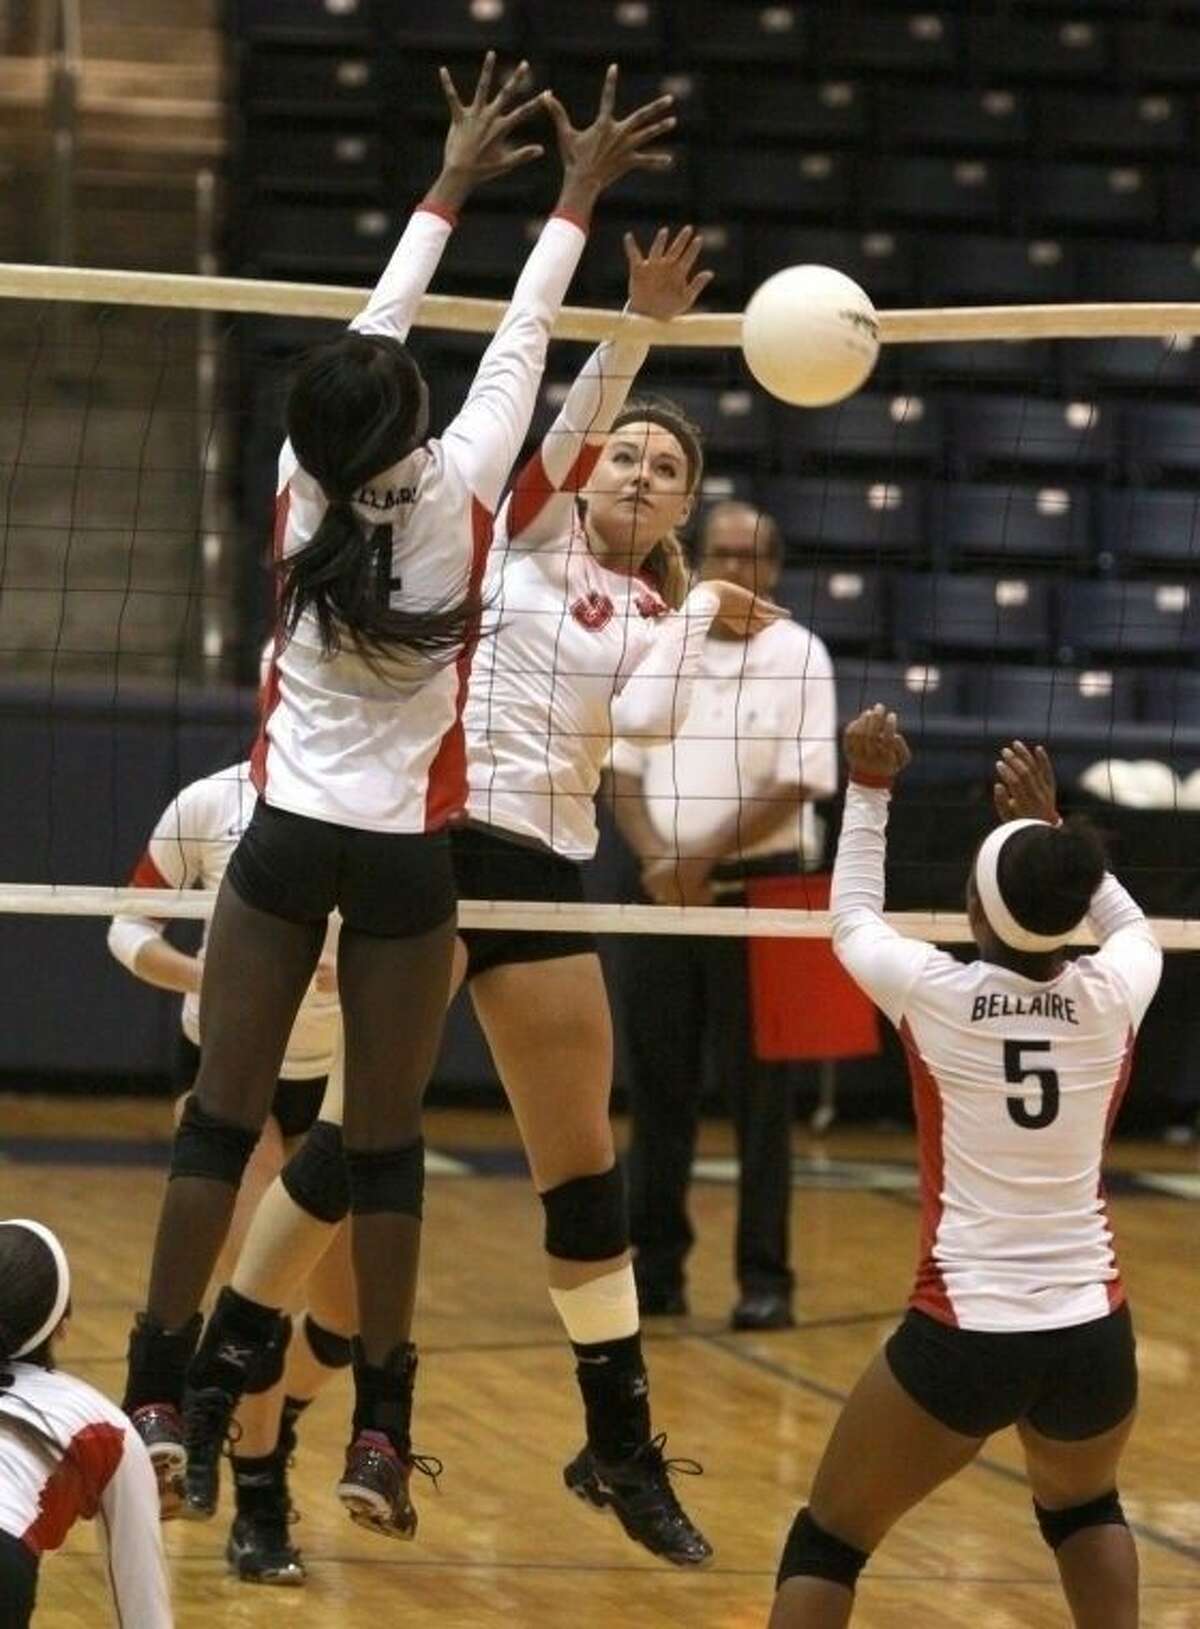 Katy graduate Channing Hankins competed in the USA Volleyball Junior National Championships with Houston Skyline 18 RoShamBo Royal.